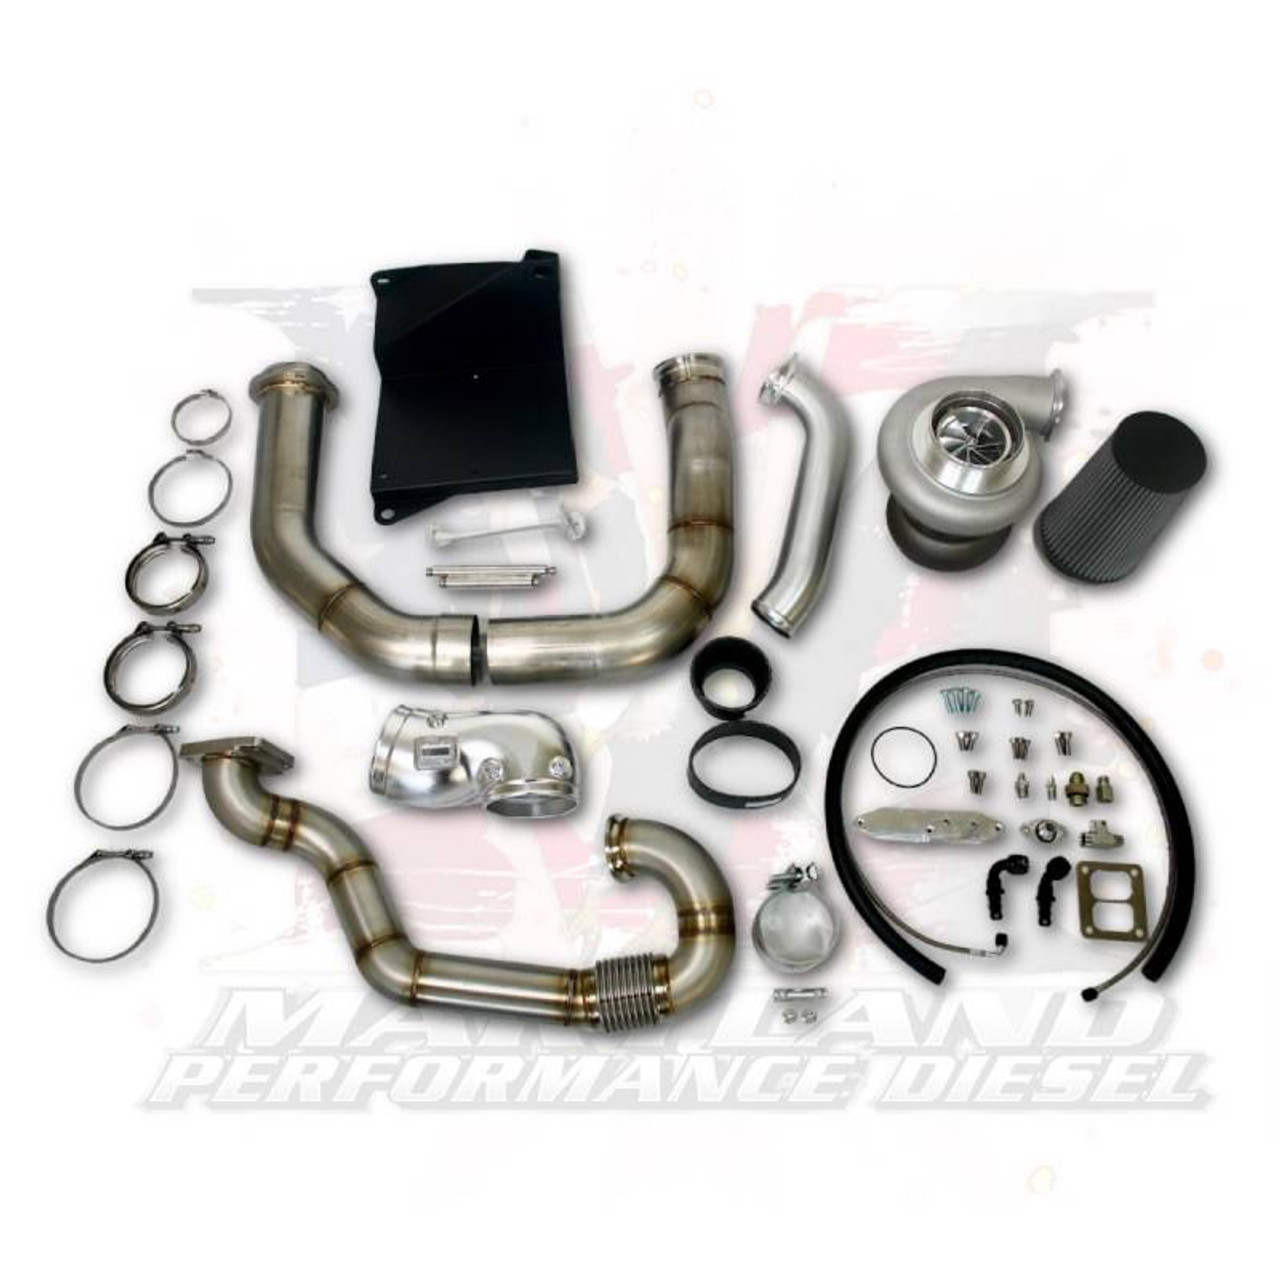 MPD Compound Kit for 2017 to 2019 Ford 6.7L Powerstroke (MPD-67-PSD-1719-CTK) Main View